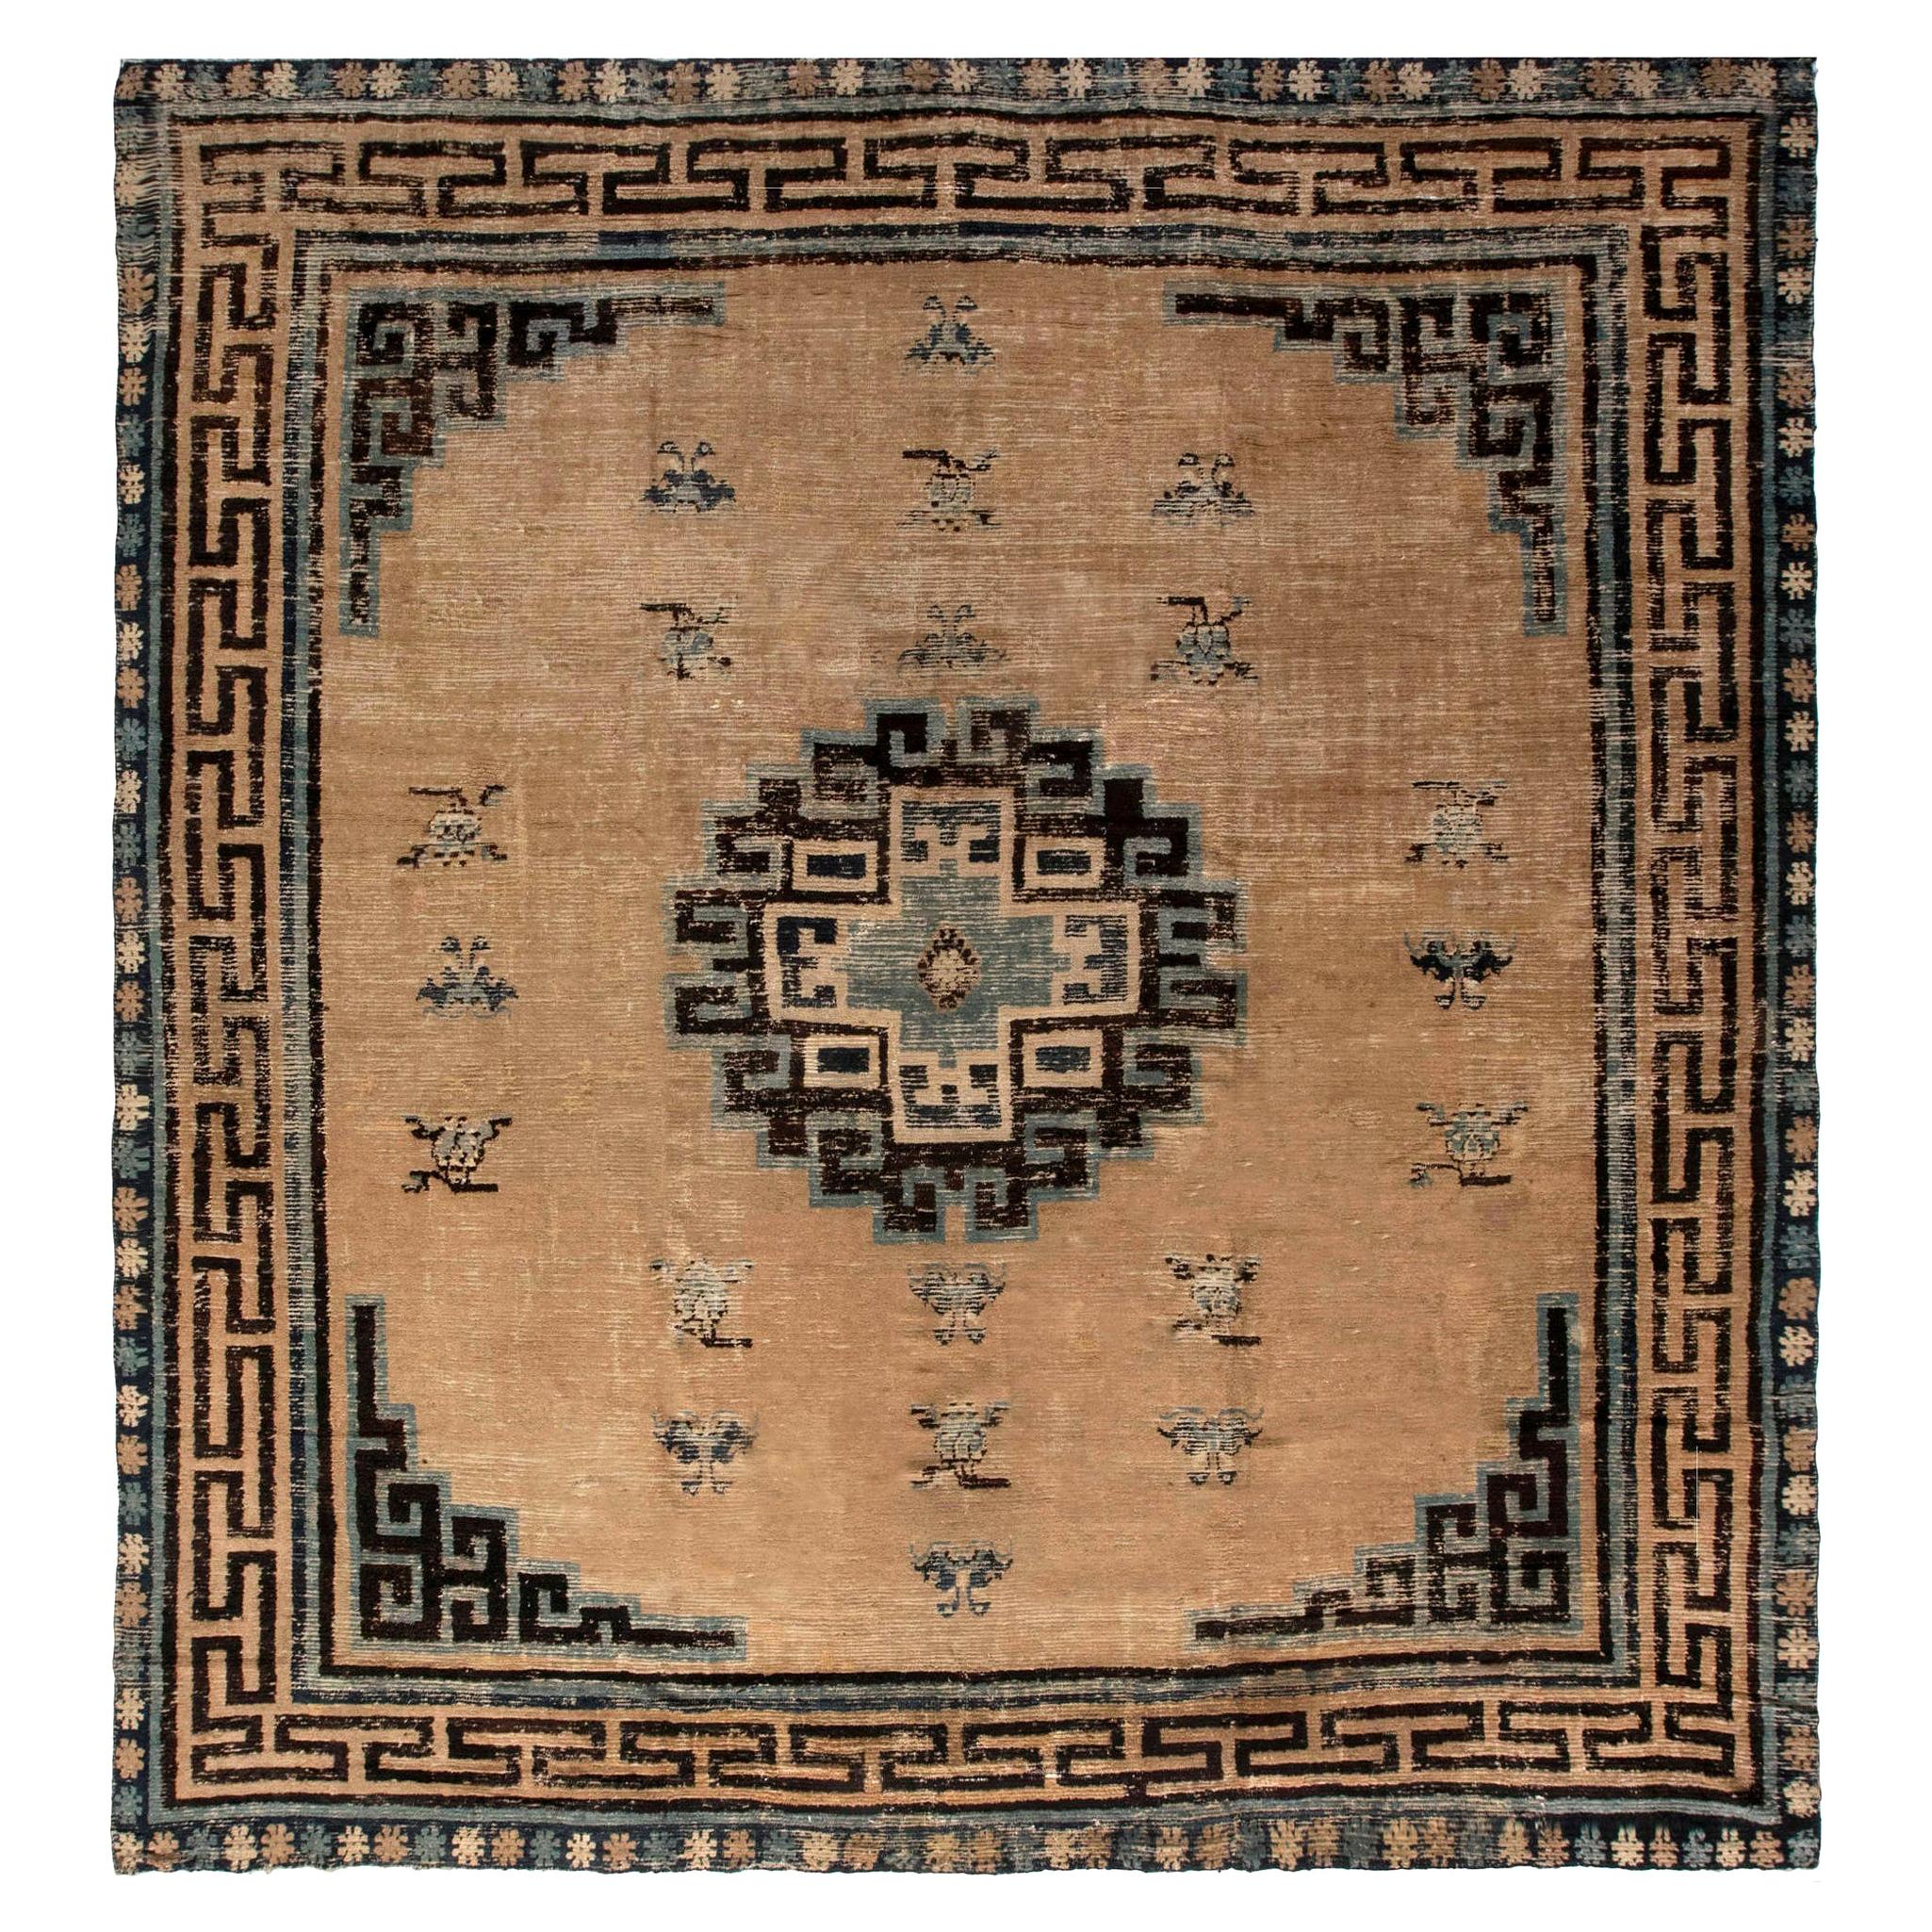 Antique Chinese Mongolian Handwoven Wool Rug